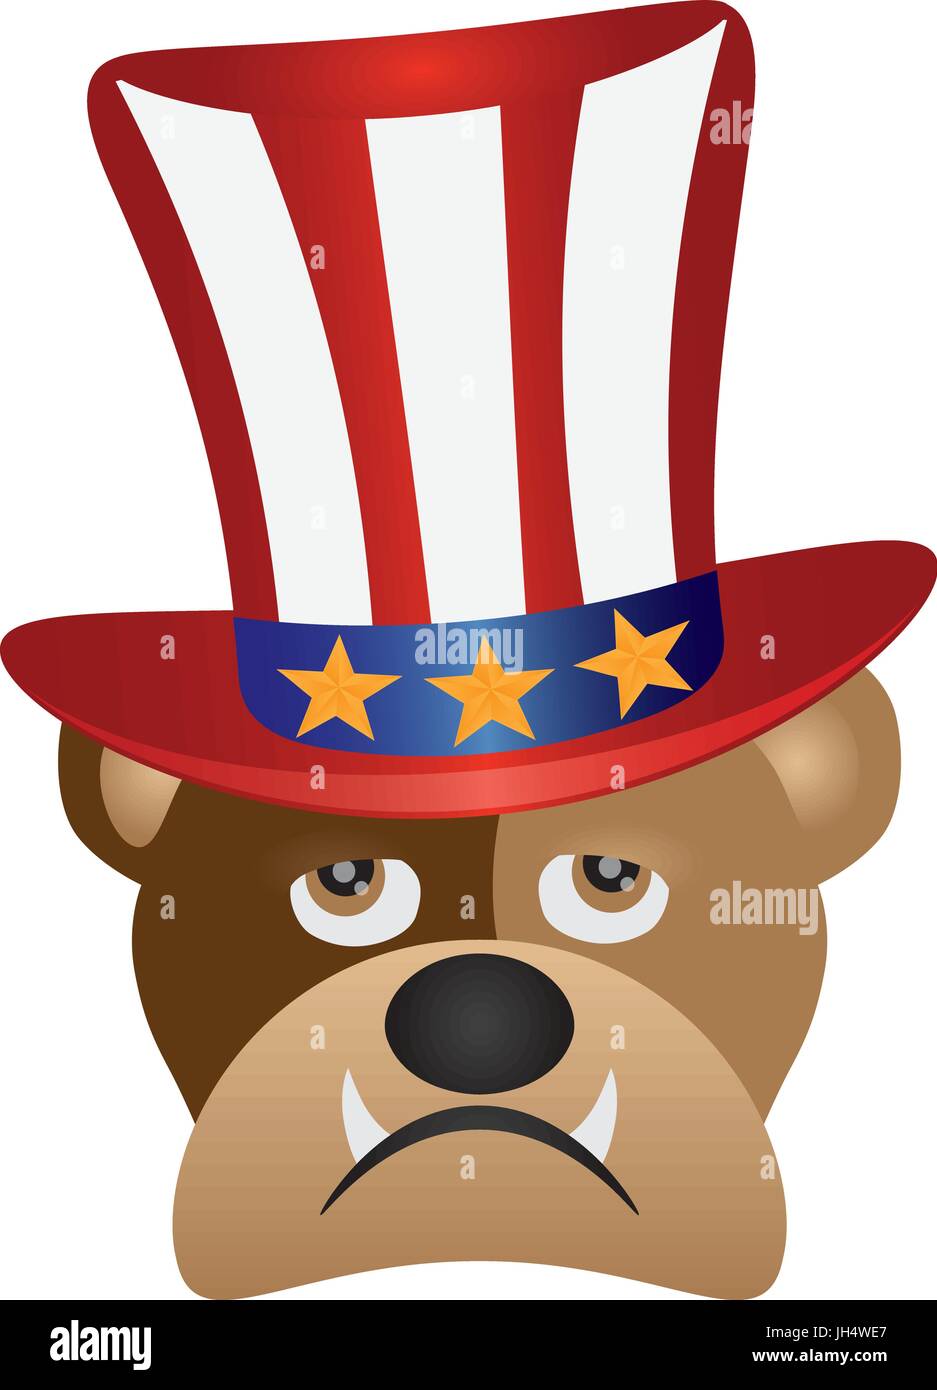 Fourth of July Hat on English Bulldog with Red White Blue Stripes and Gold Stars for 4th July Independence Day Illustration Stock Vector